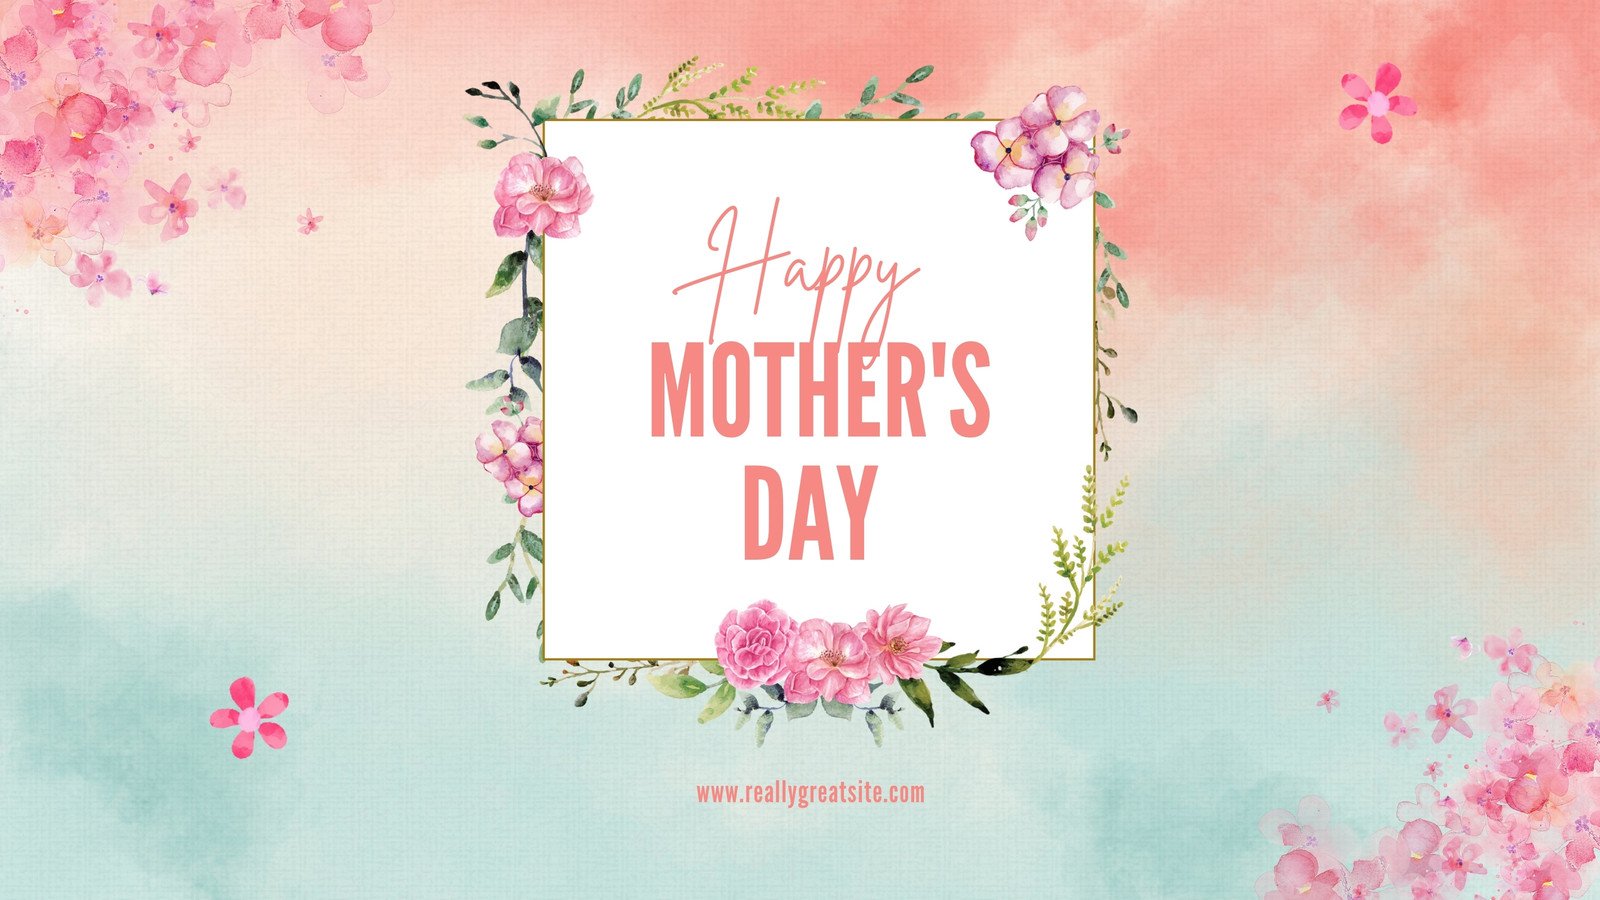 Free And Customizable Mother'S Day Video Templates | Canva